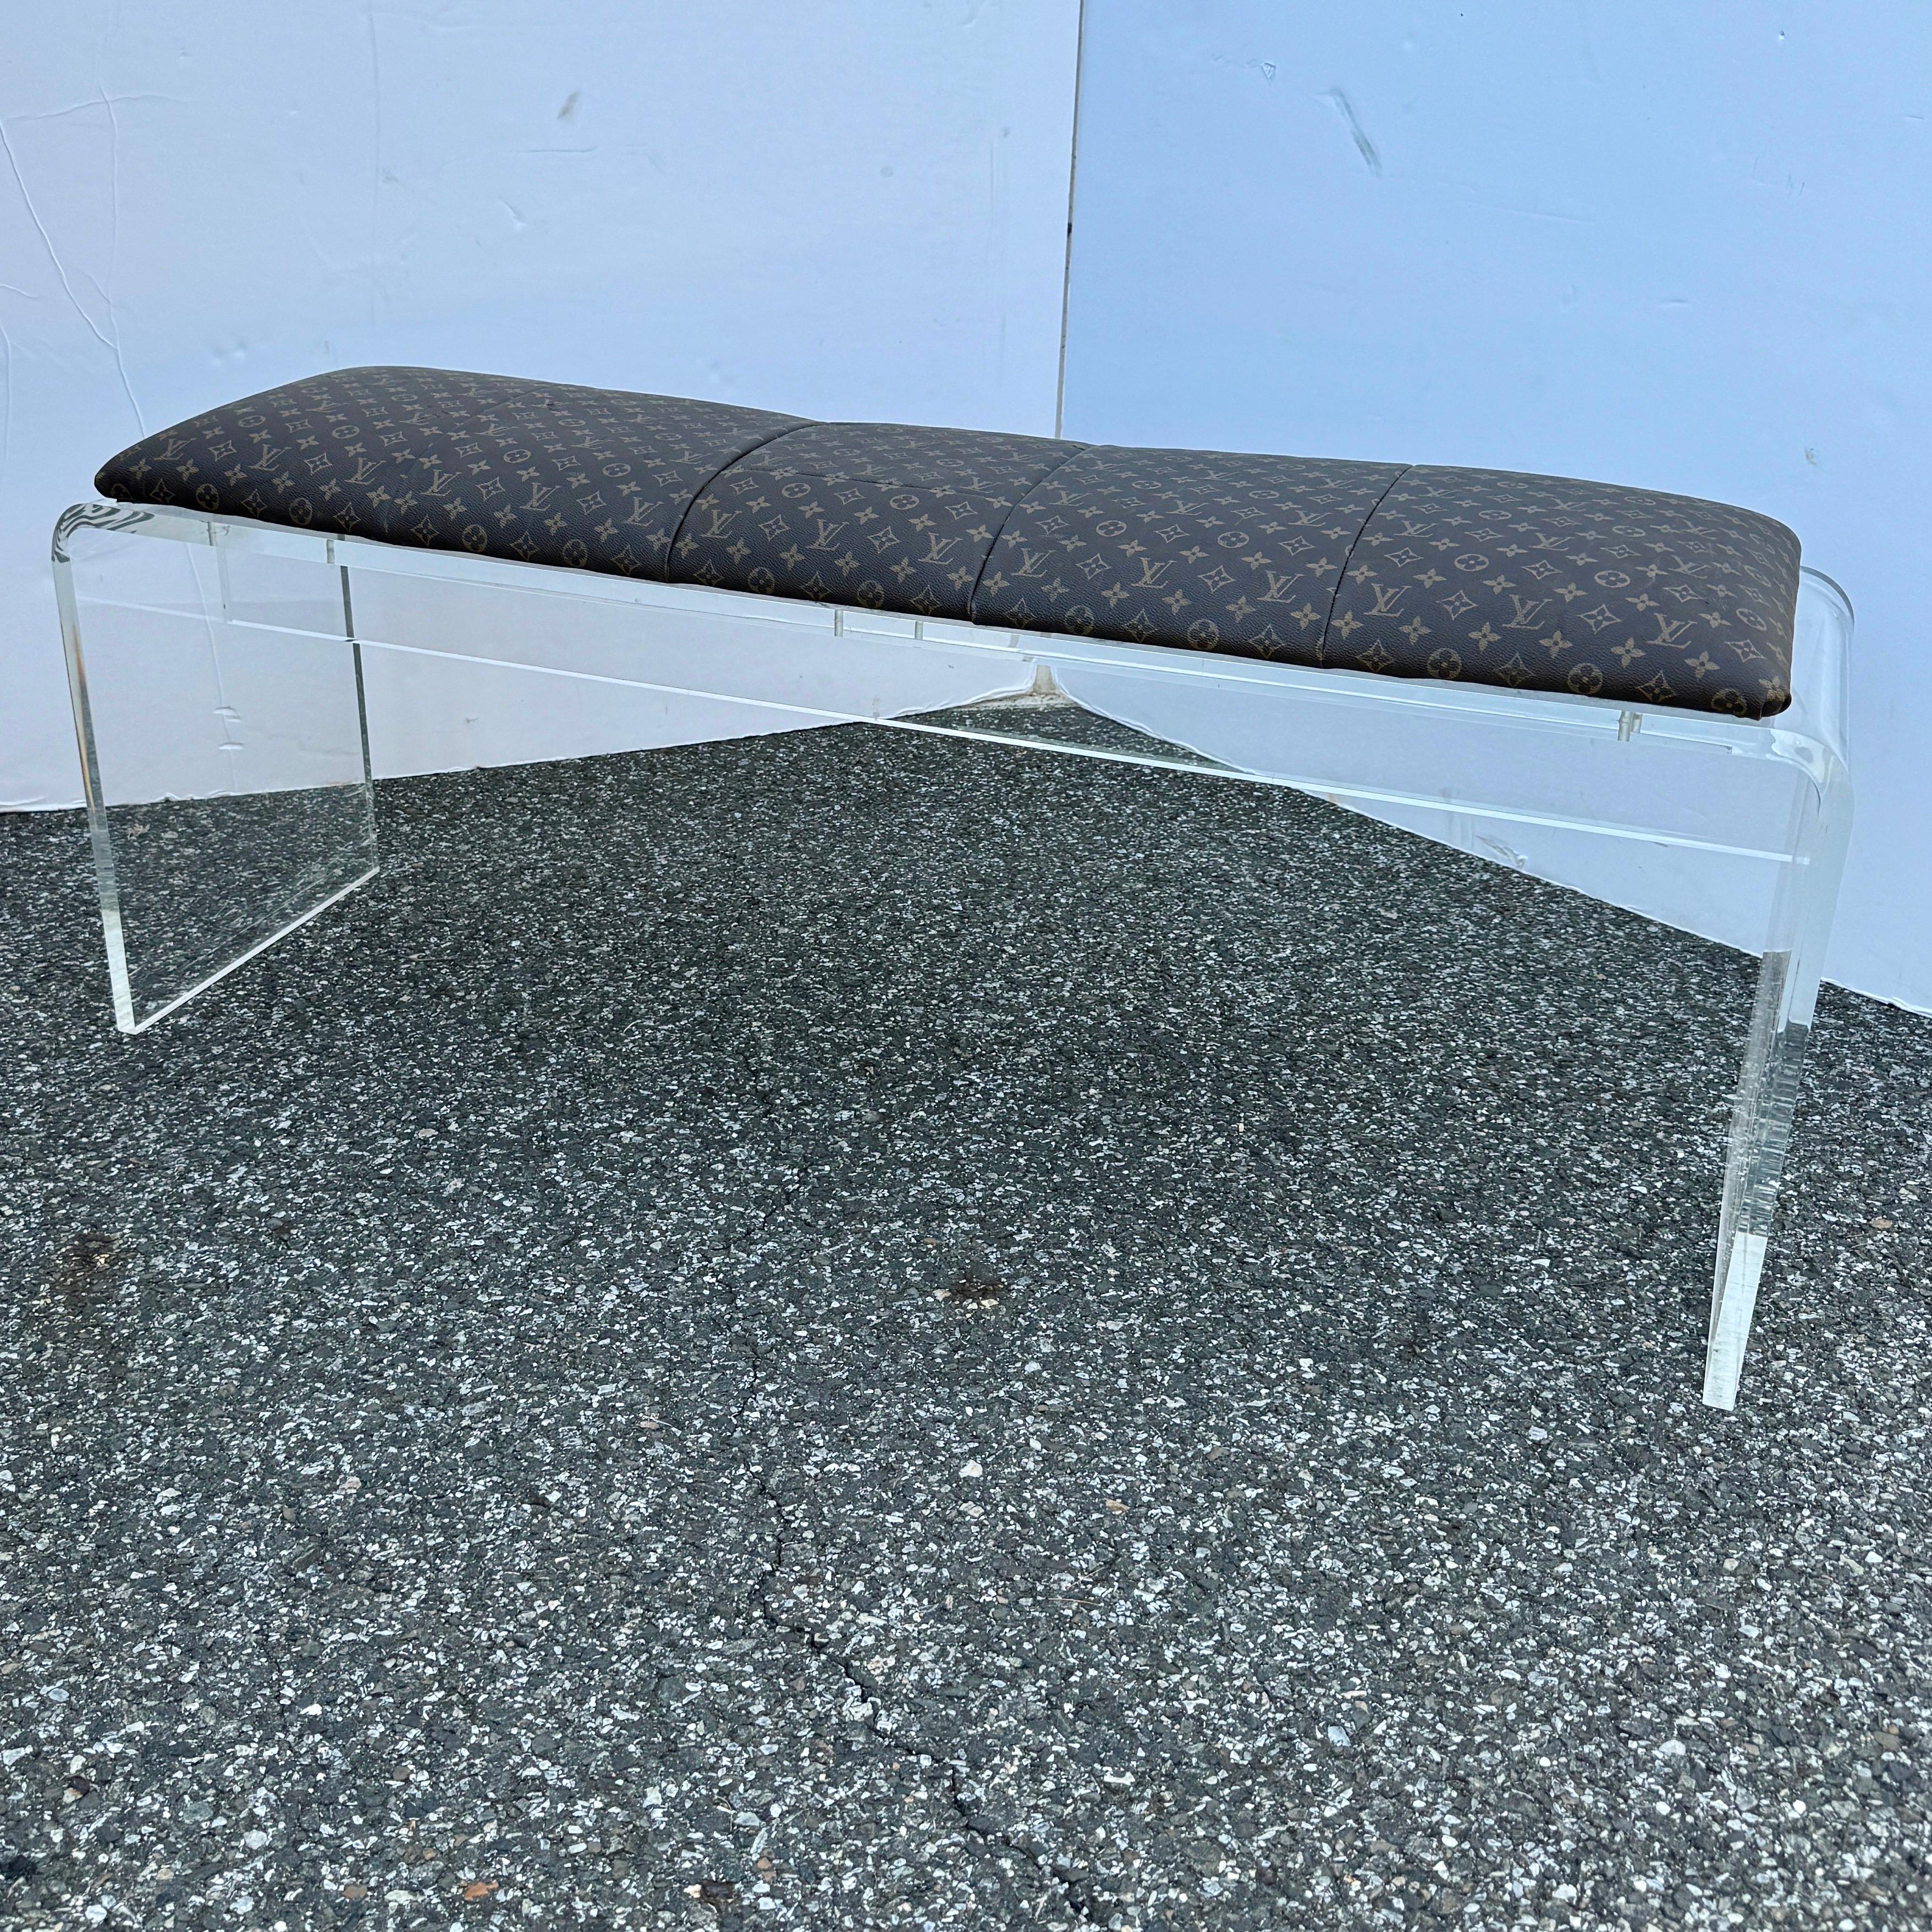 Lucite Bench Upholstered in Louis Vuitton Monogram Fabric  In Good Condition For Sale In Haddonfield, NJ